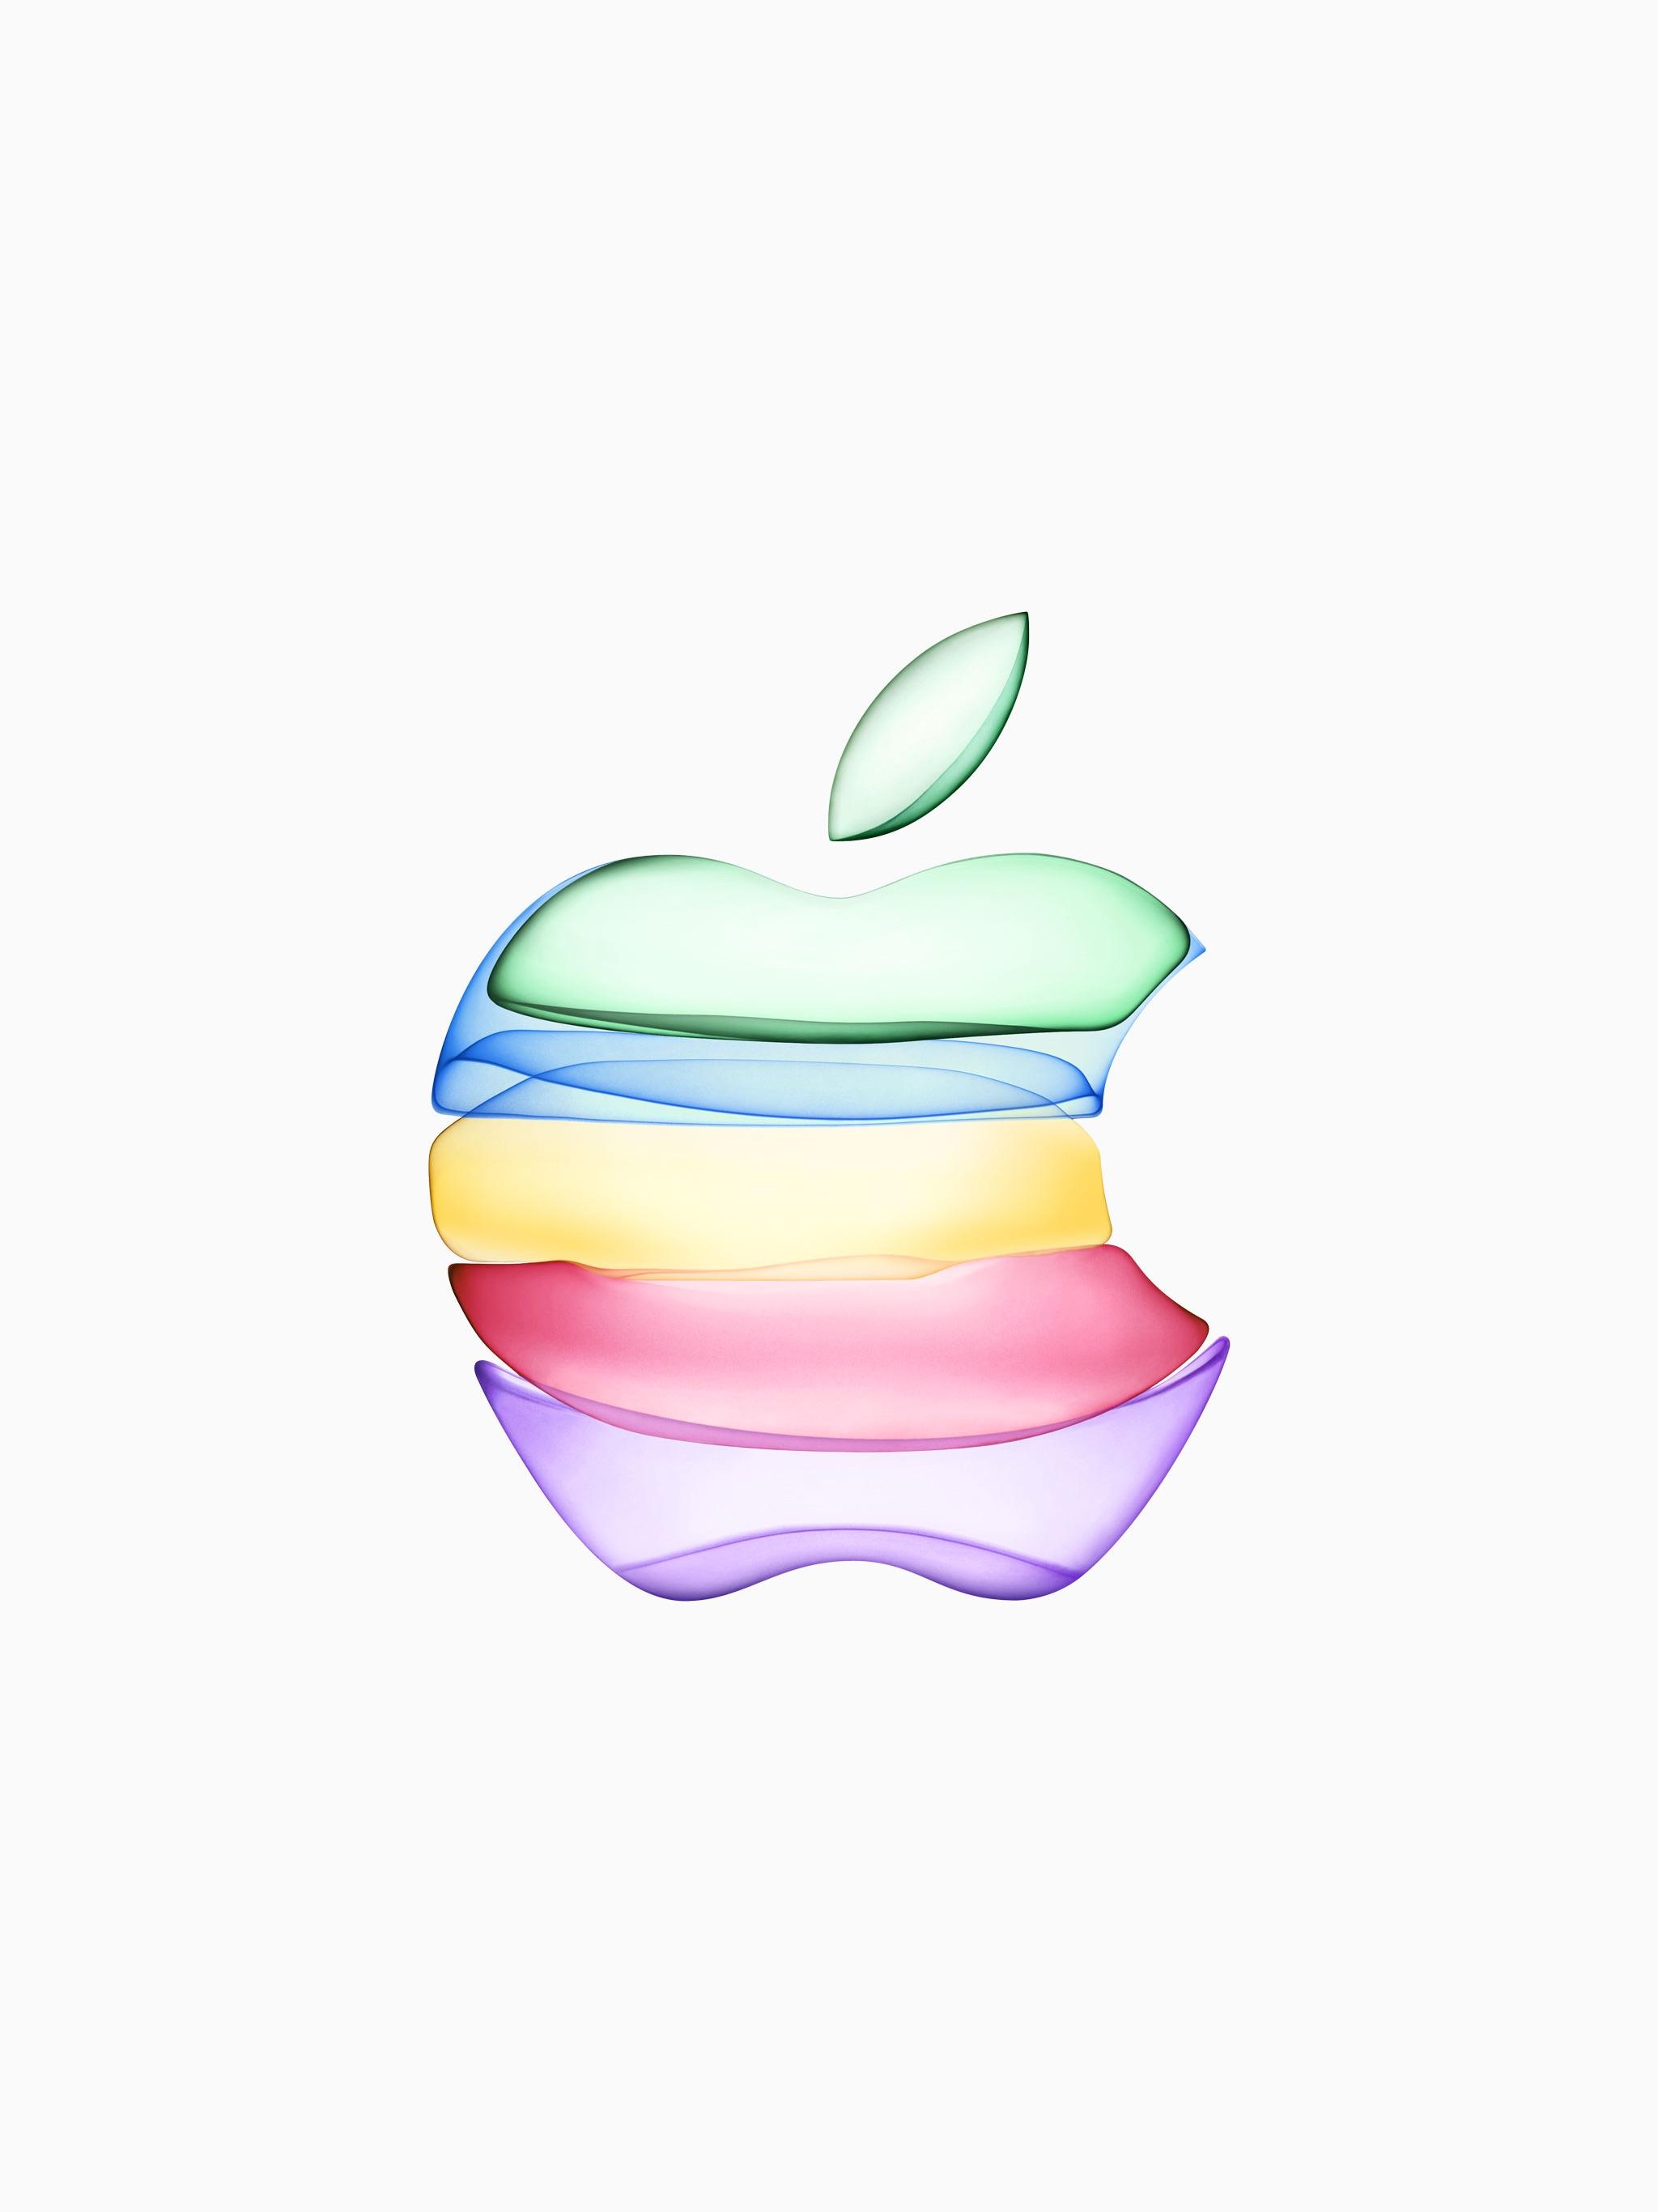 Download iPhone 11 Event Apple Logo Wallpaper For iPhone, iPad